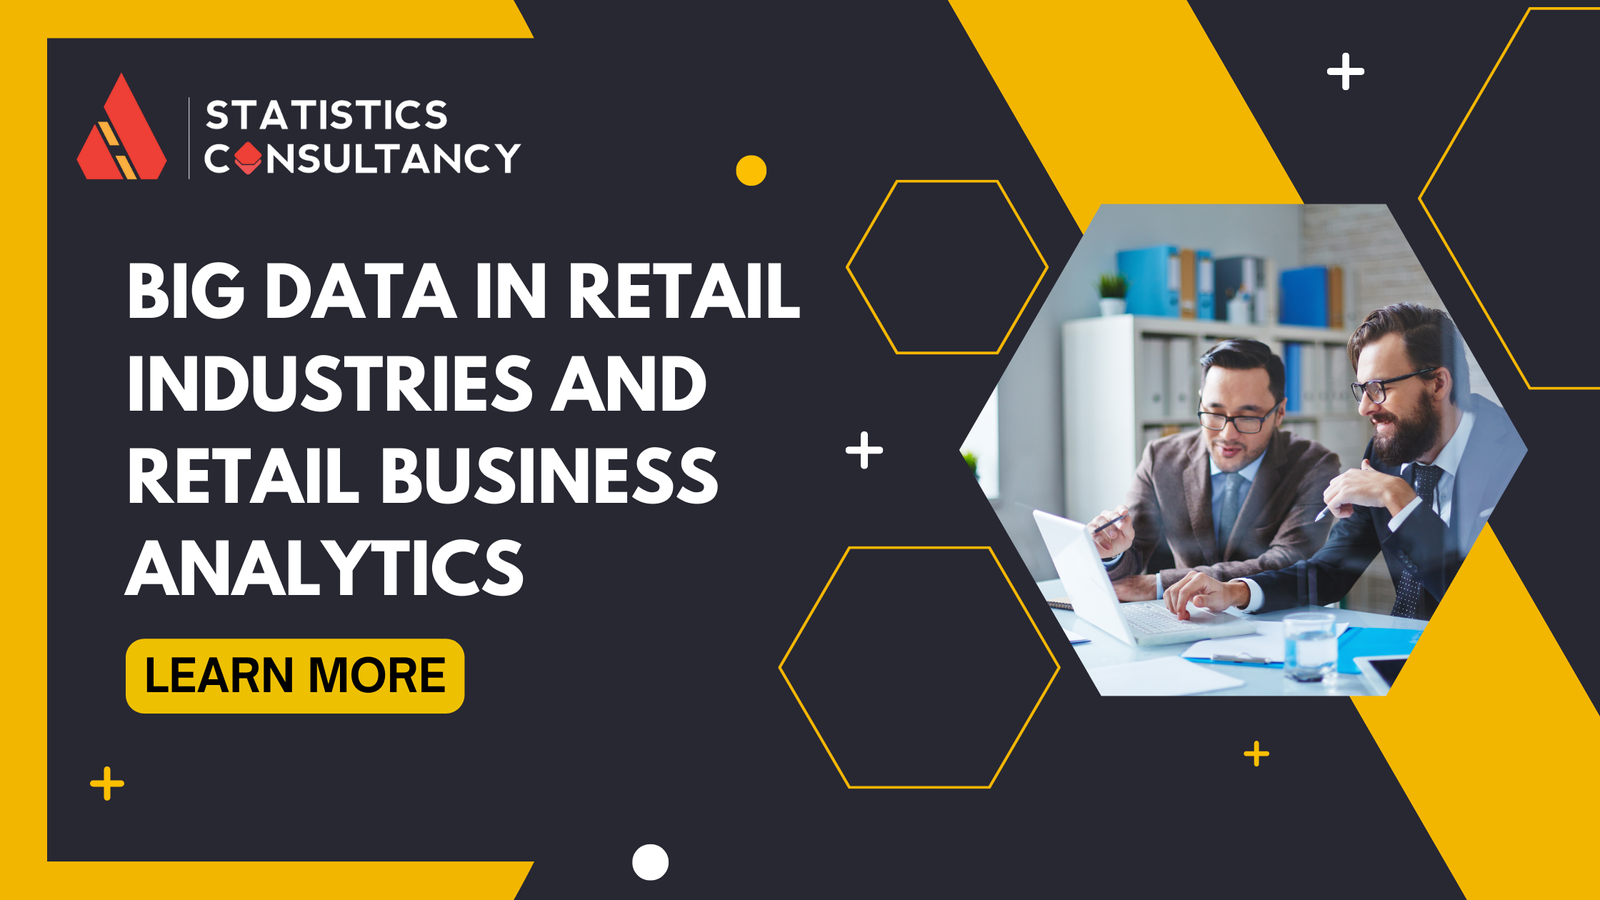 Big Data in Retail Industries and Retail Business Analytics